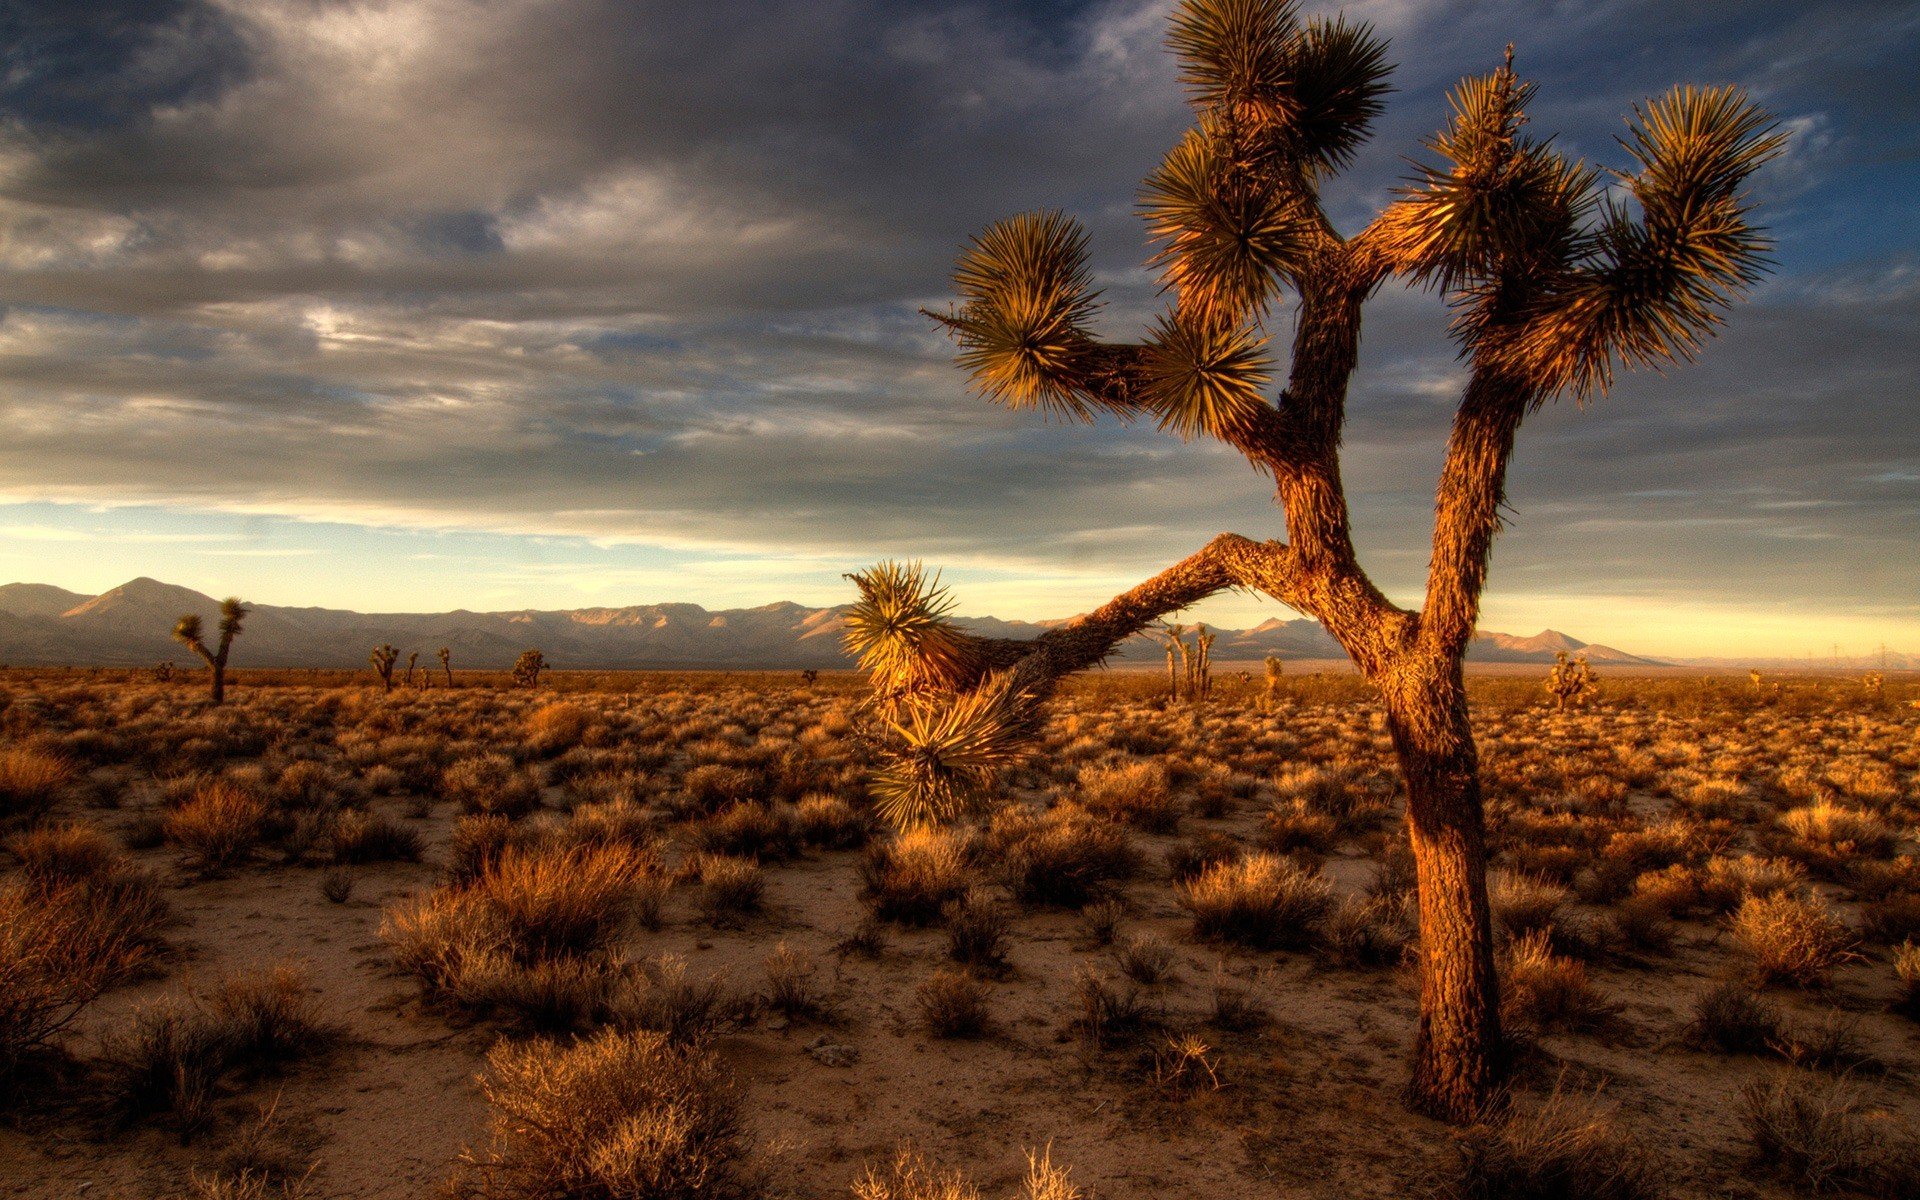 A Guide to California Deserts